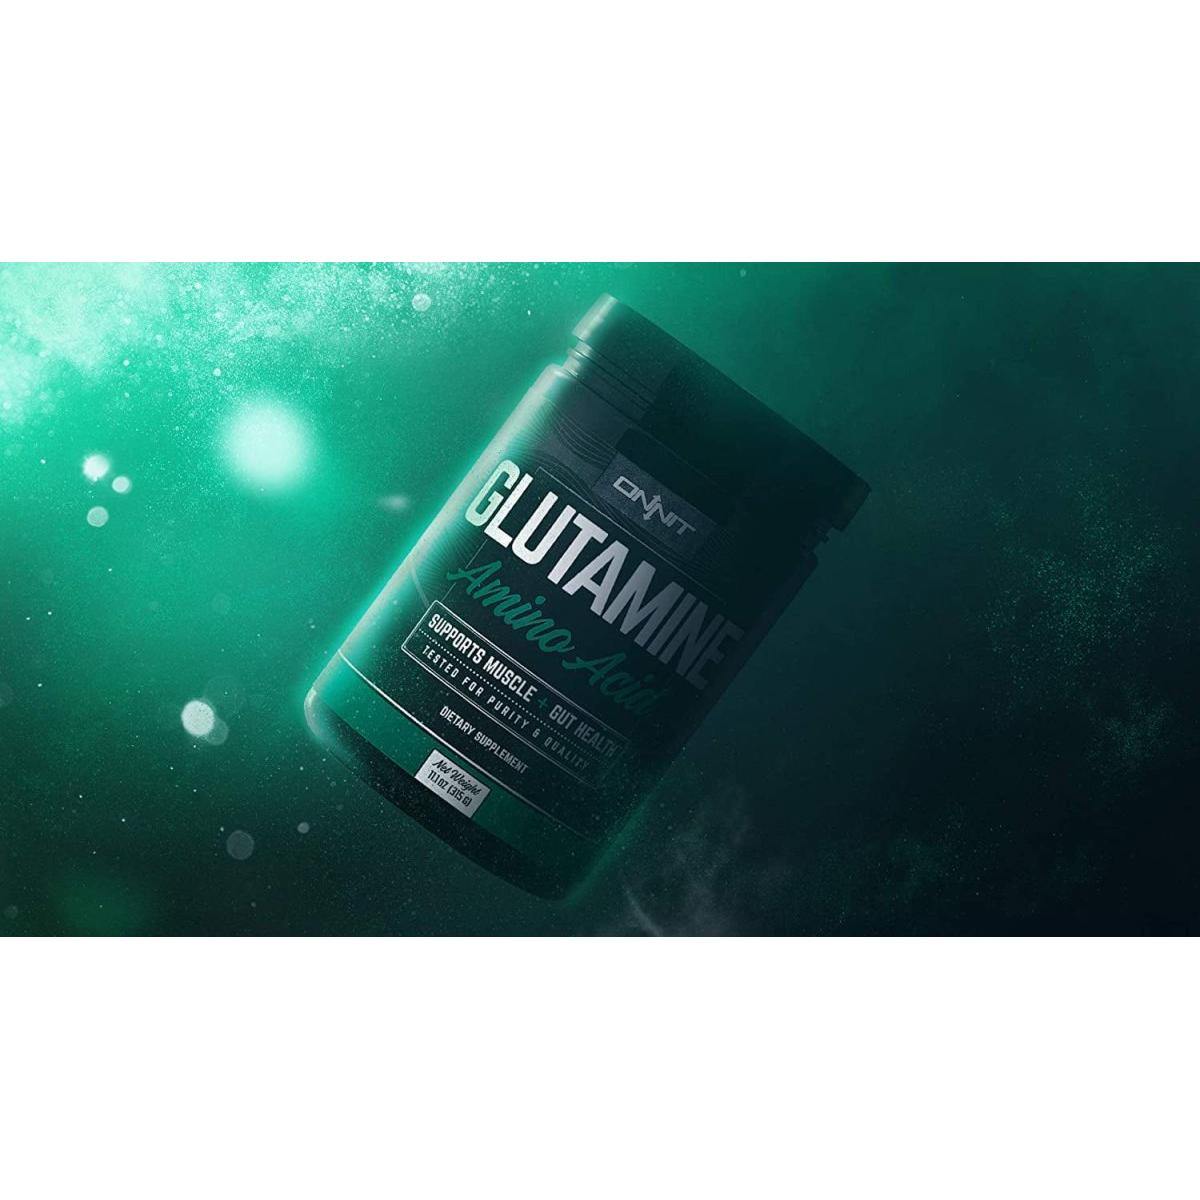 Onnit Glutamine | Boosts Aerobic Performance, Reaction Time and Gut Health | NSF Certified for Sport | 60 Servings (Unflavored) - Glam Global UK